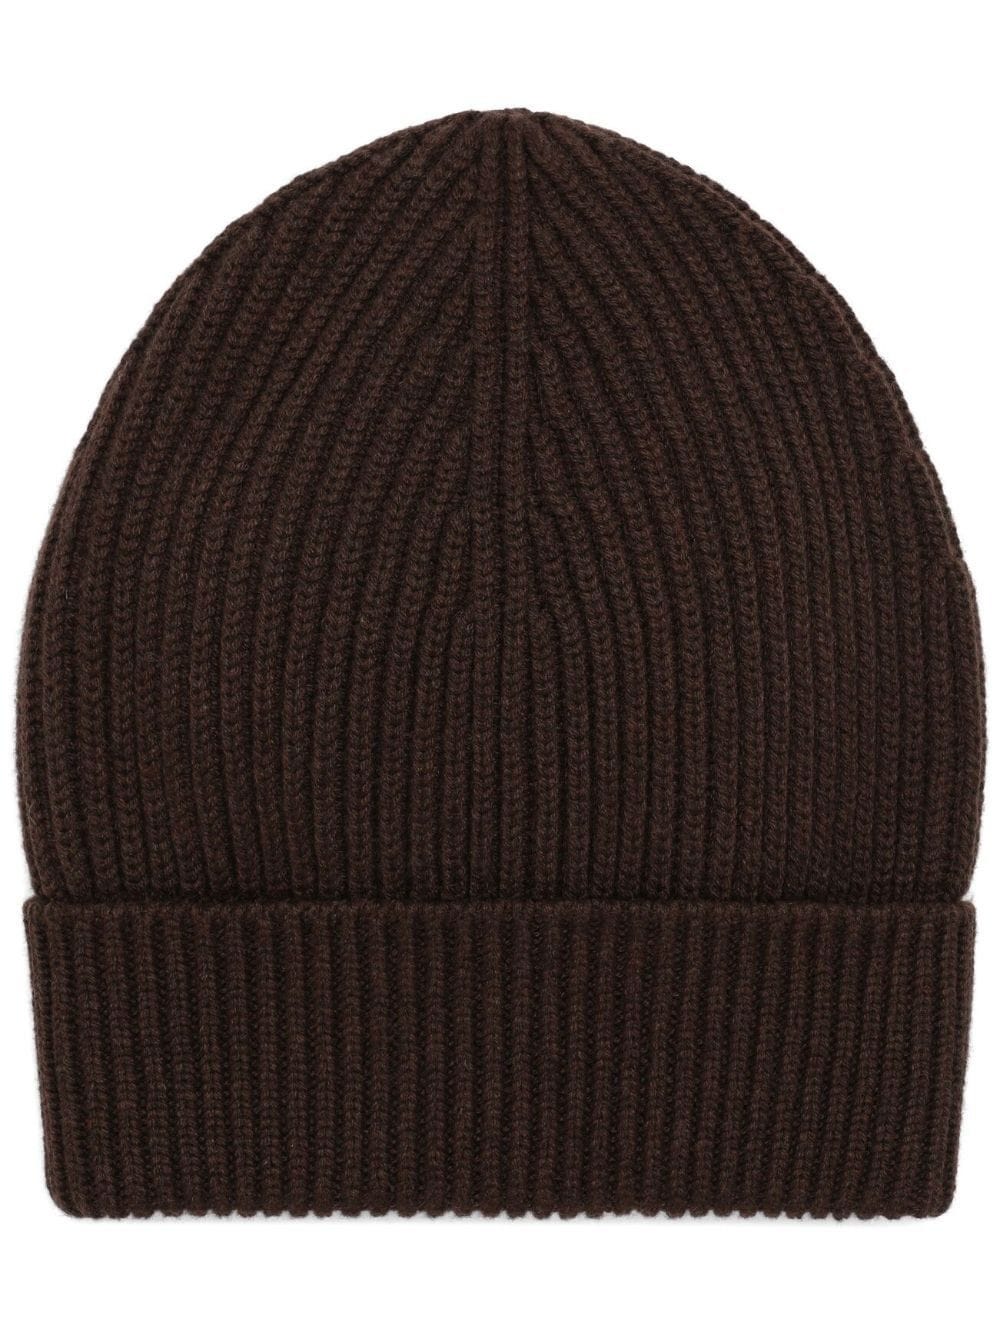 DOLCE & GABBANA BROWN RIBBED CAP WITH LAPEL